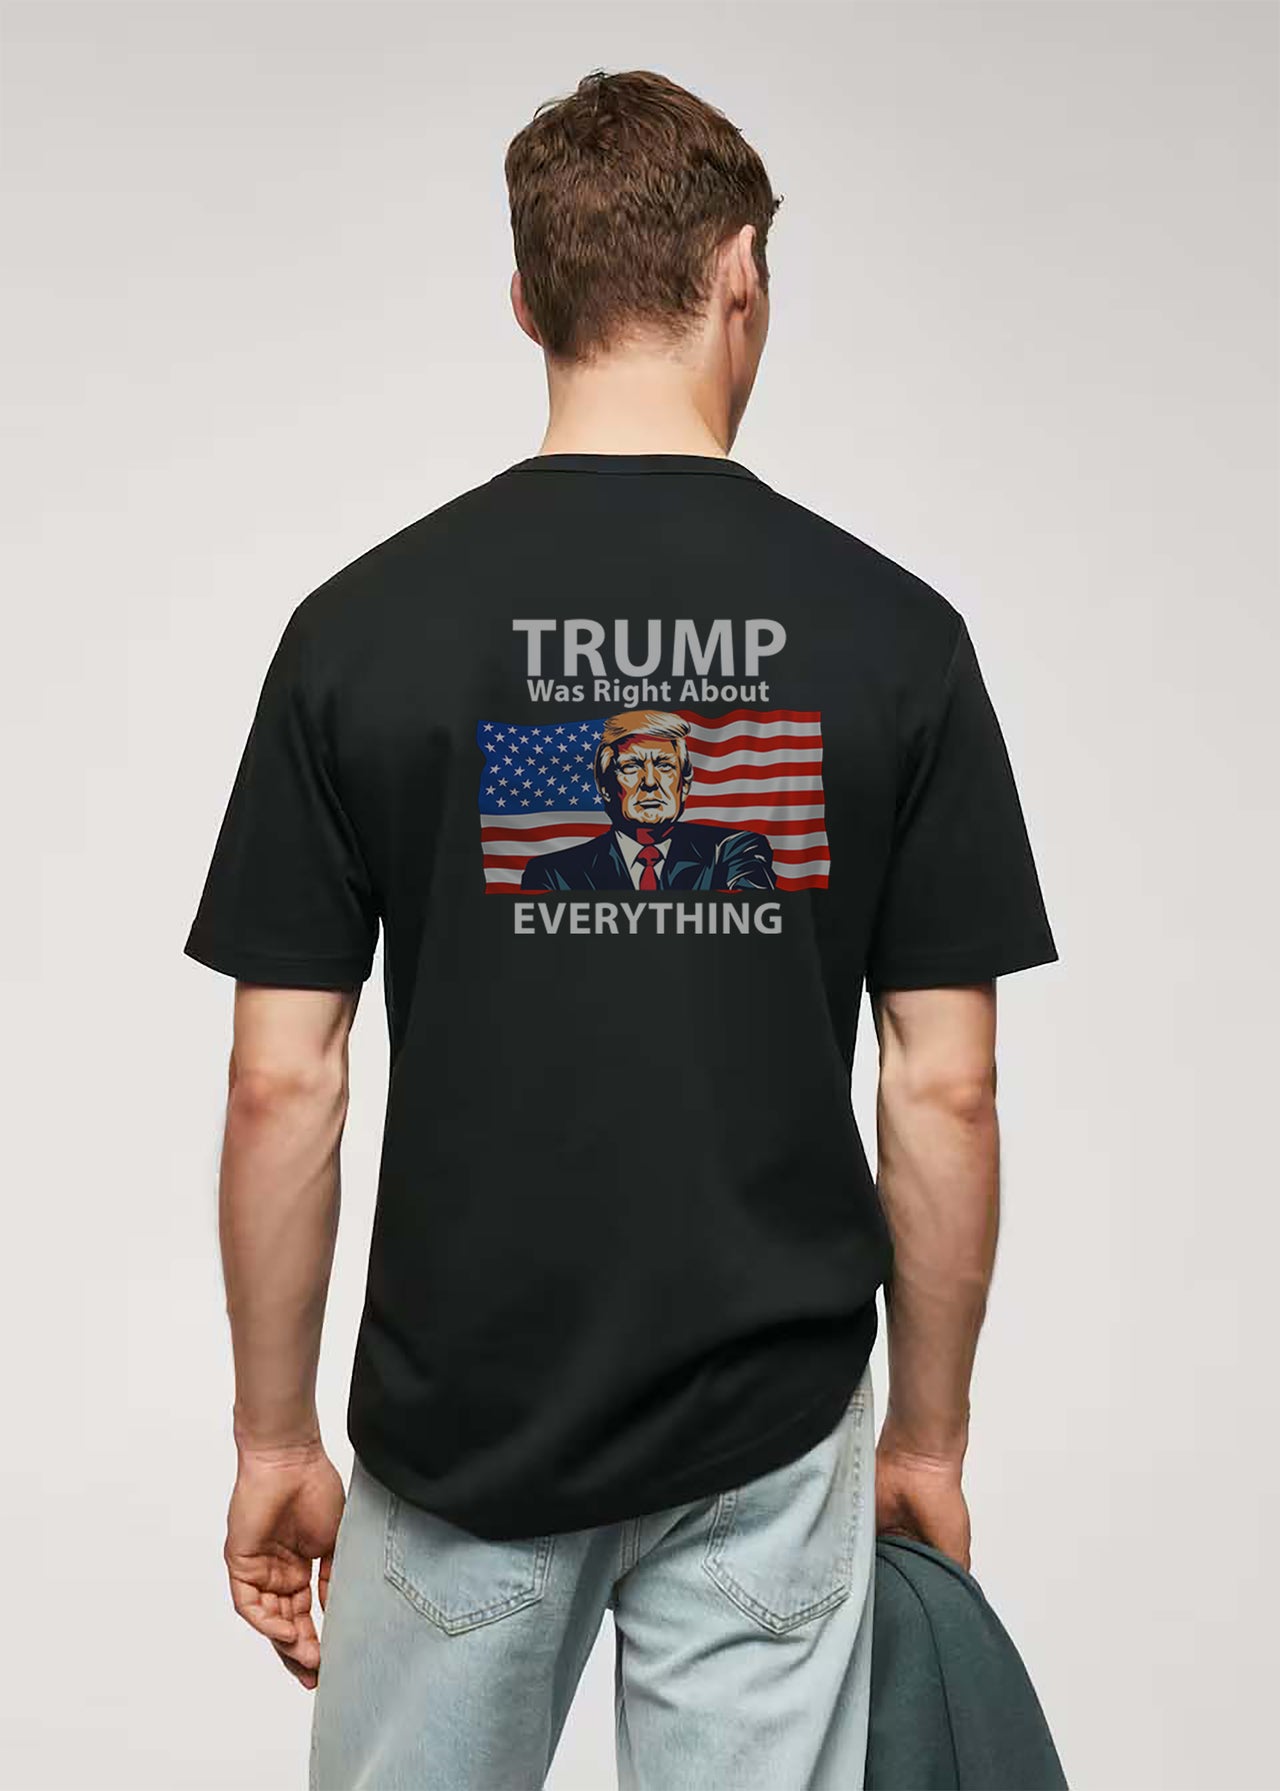 For the Donald Trump Supporters: The new collection is already available and contains express shipping for the USA | Support Trump